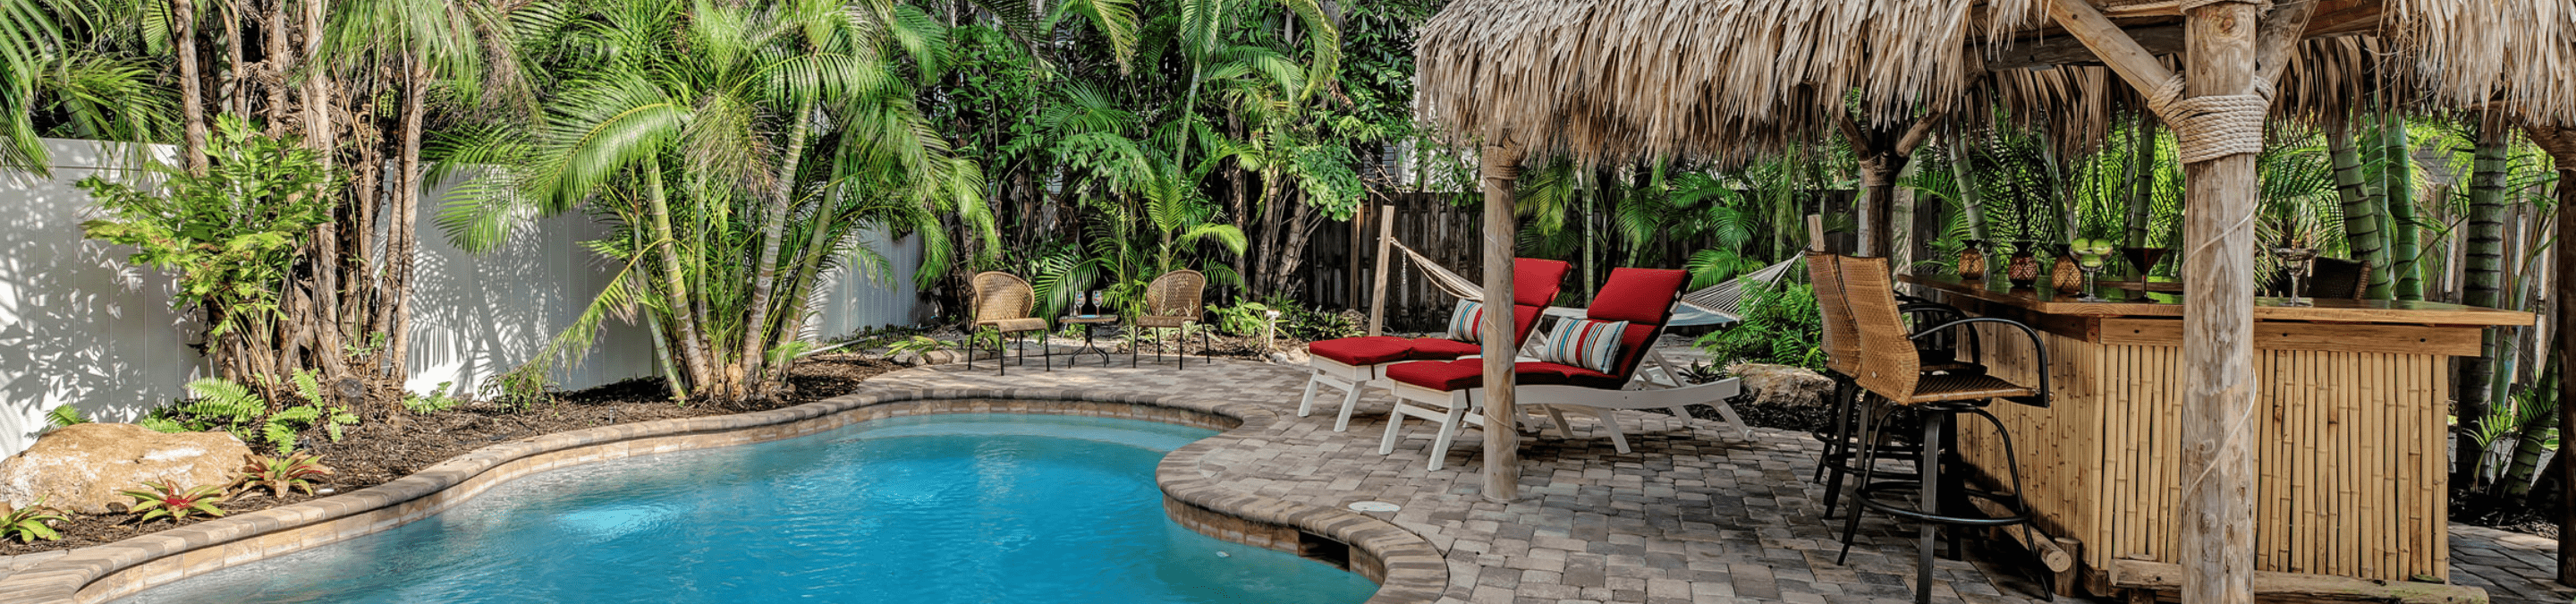 Our anna maria island 4 bedroom vacation rental with paver patio around circular pool surrounded by tall palm trees with a hammock in the background and a tiki hut with a bar to the right of the pool.